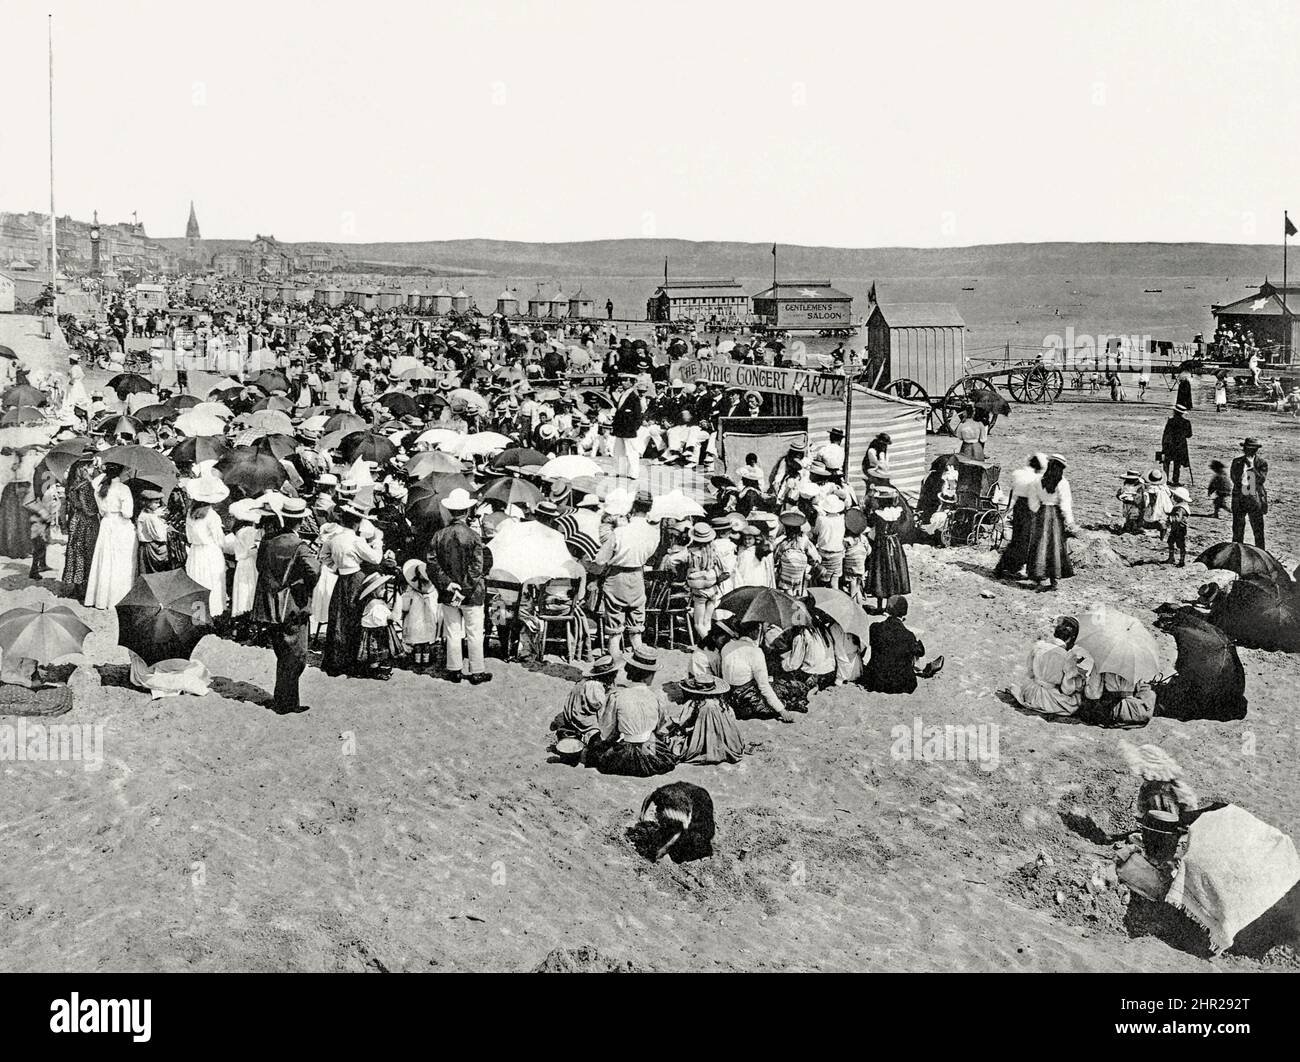 A busy beach scene at the British seaside resort of Weymouth, Dorset, England, UK c. 1900. Seaside entertainment on a wooden stage set up on the beach features a troupe called ‘The Lyric Concert Party’. They wear white trousers and straw boater and sailor’s hats. The audience stand or sit mainly on wooden chairs – many with umbrellas and parasols to protect from the sun. Some children play in the sand. In the background are bathing huts and wheeled bathing machines. One large cabin has a star on its roof and a sign indicating that it is a ‘Gentleman’s Saloon’ – a vintage Victorian photograph. Stock Photo